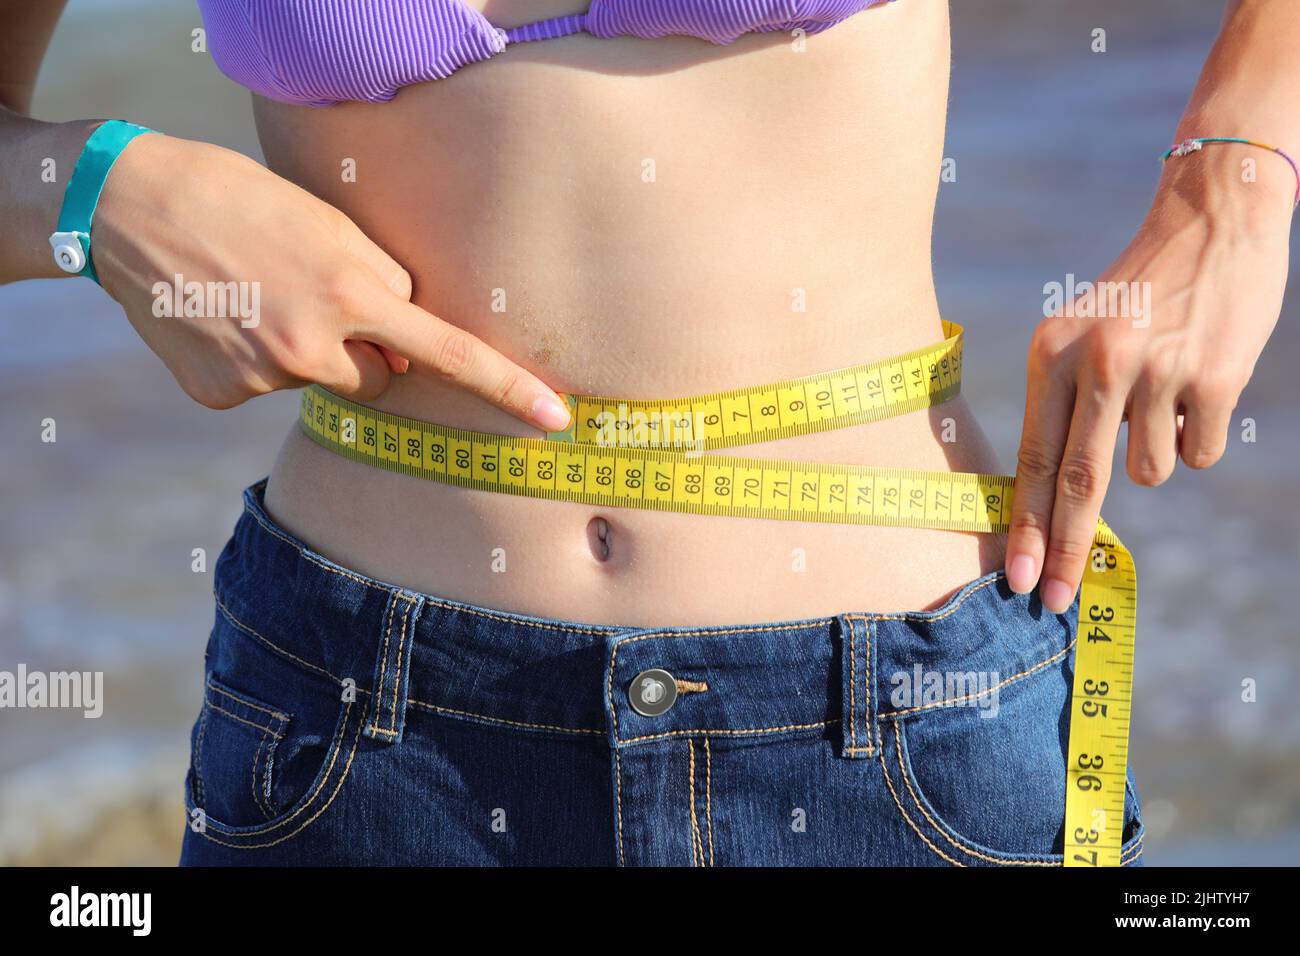 thin girl who measures her waist with the flexible measuring tape and shows her navel on her belly Stock Photo